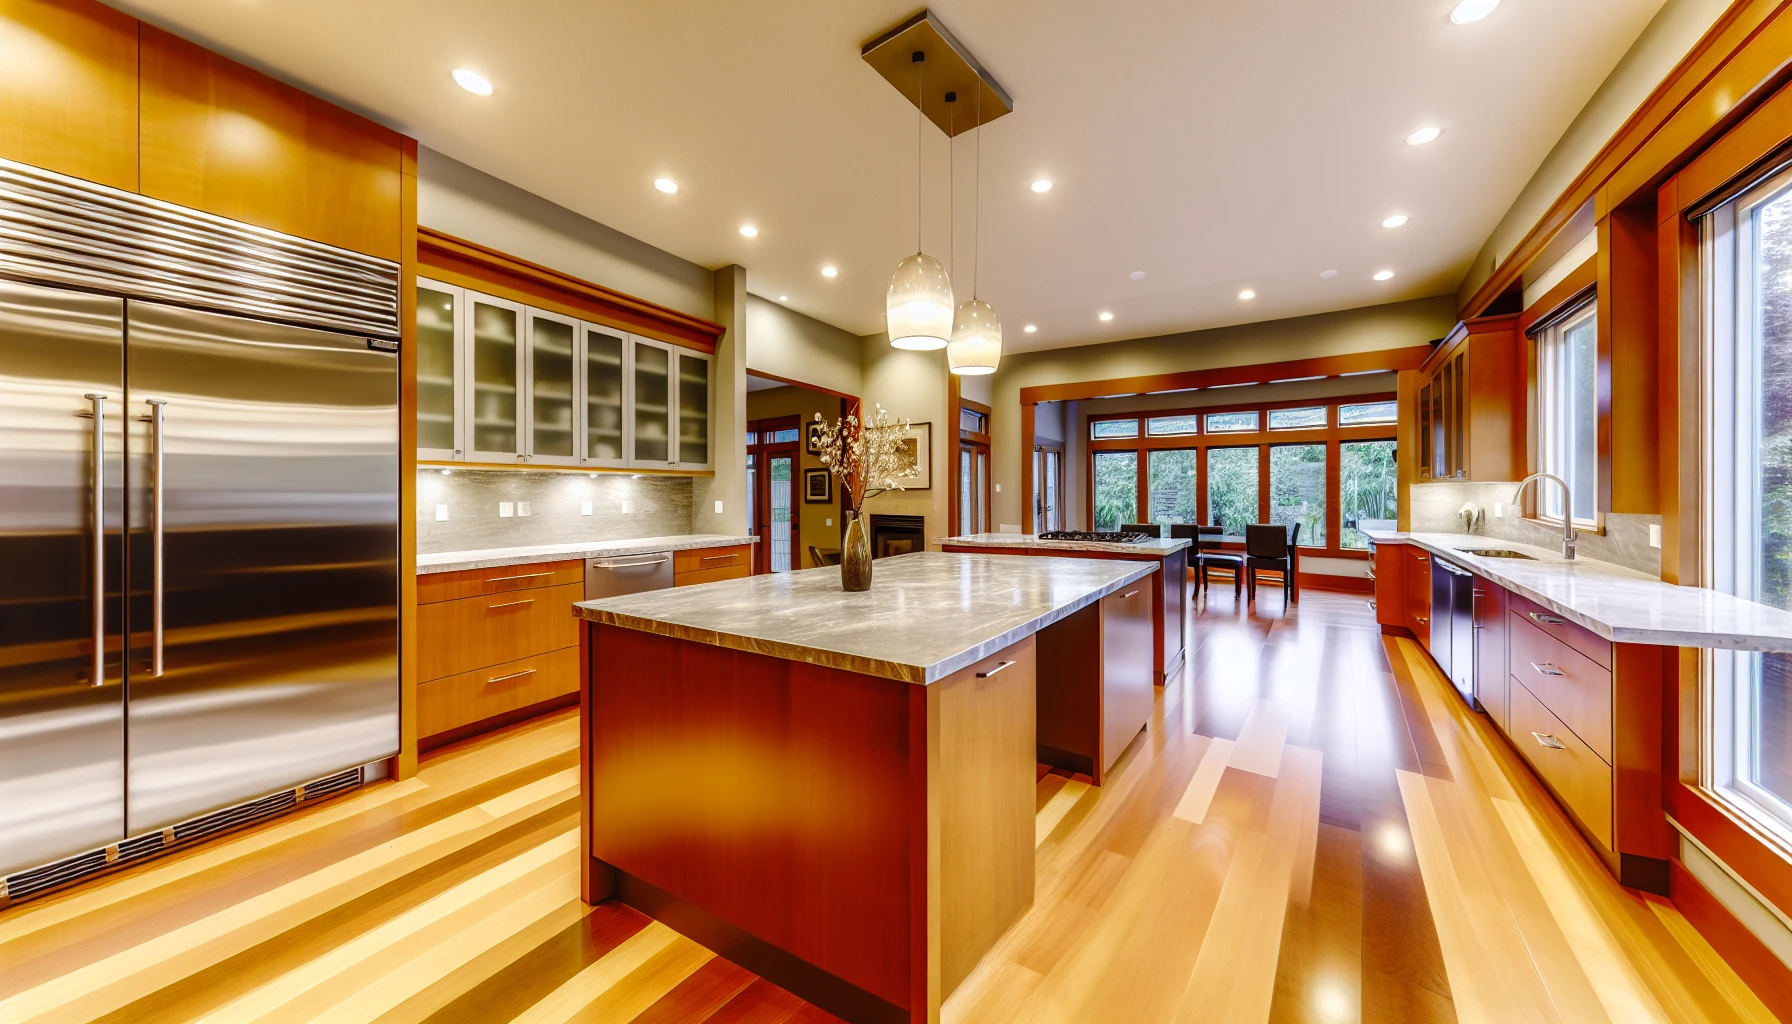 A spacious, well-lit kitchen in a single-family home